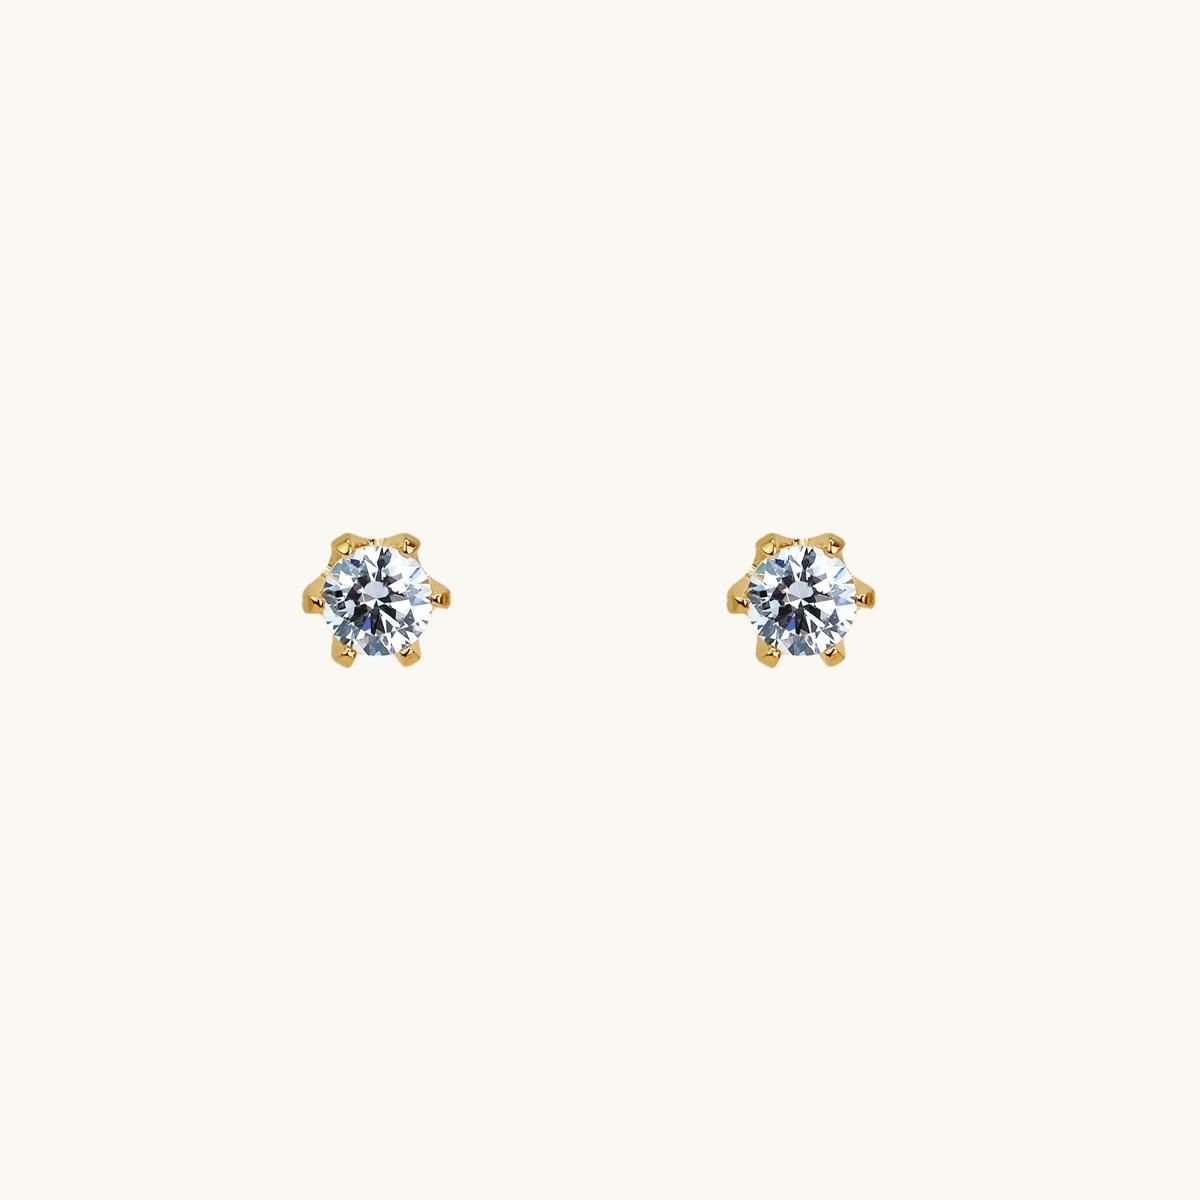 Pin earrings with a 4mm white stone